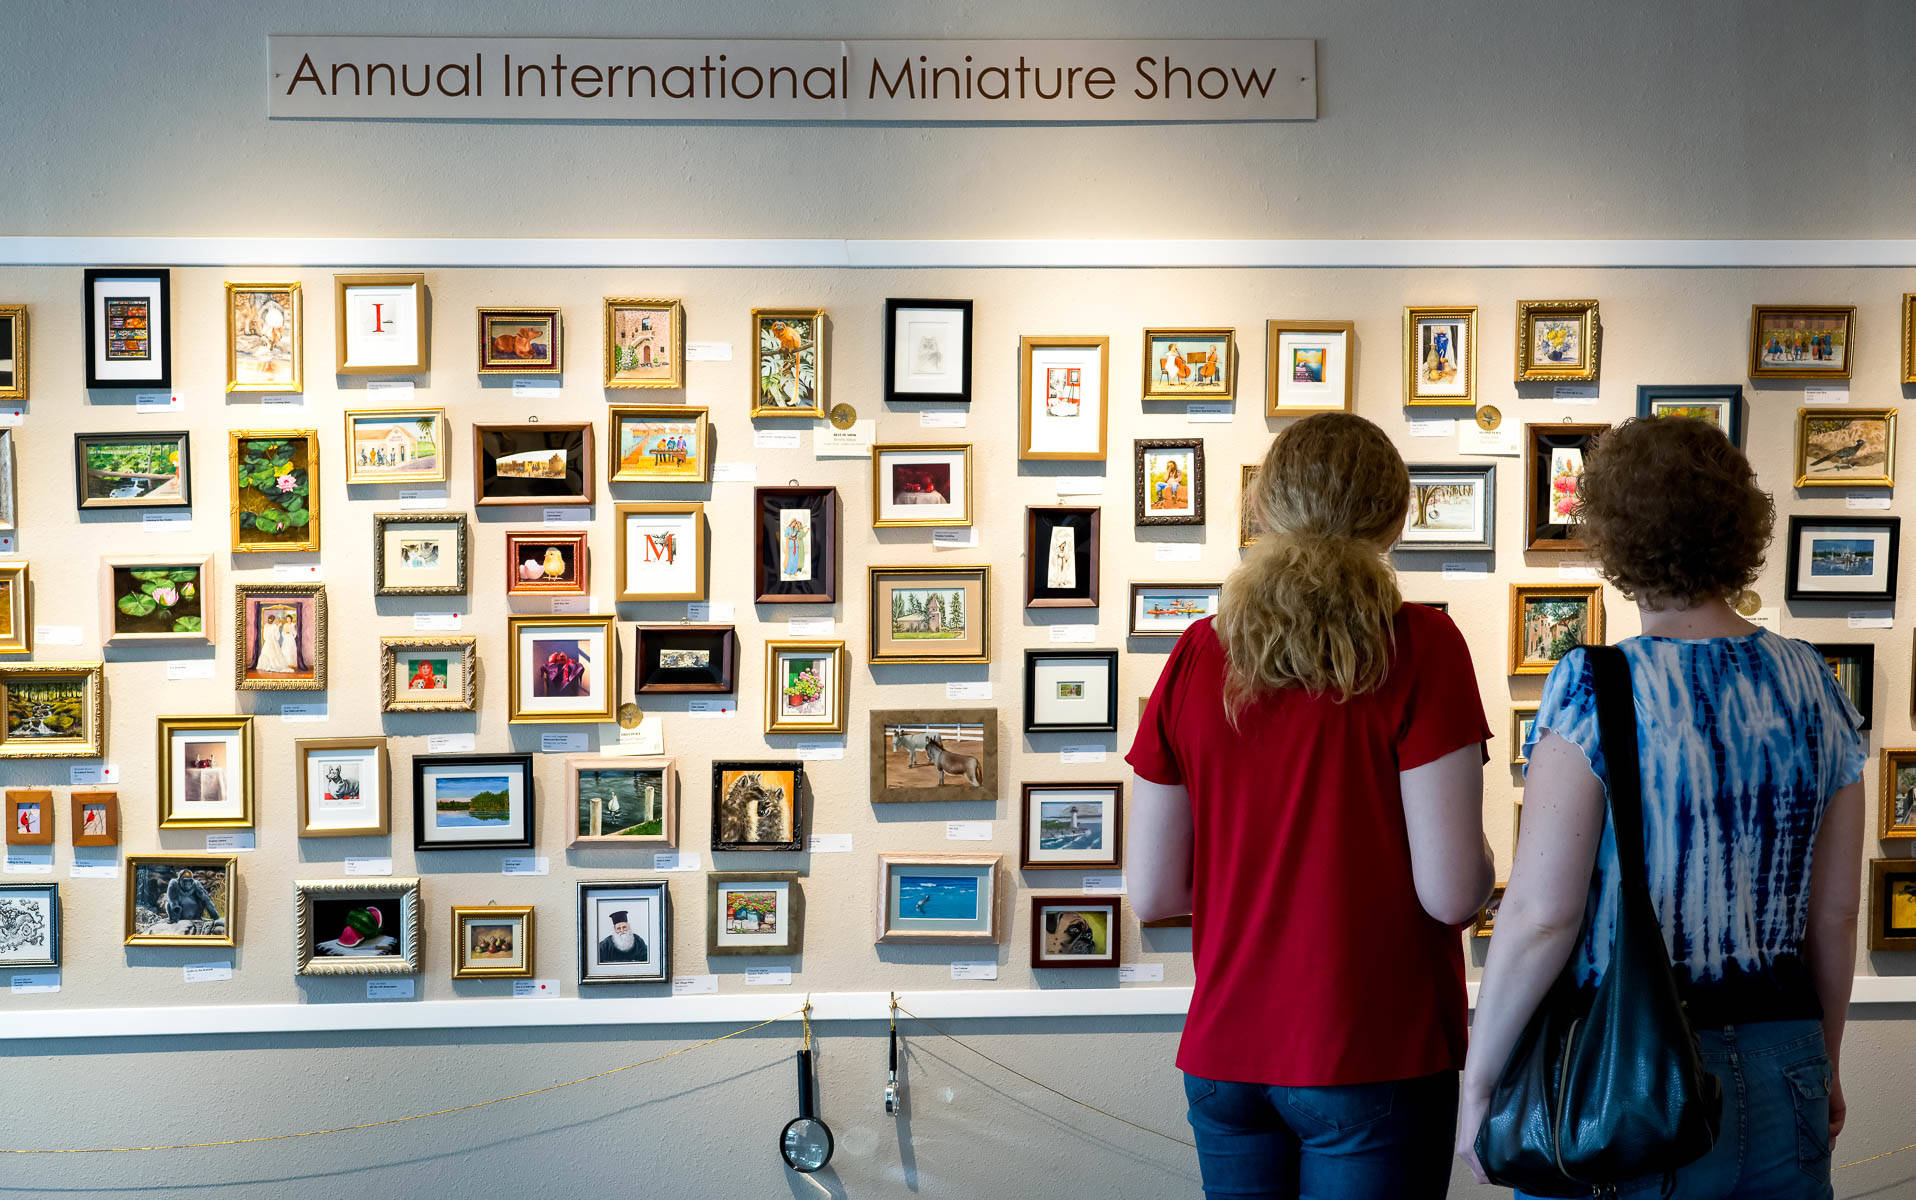 This photo shows a miniature artwork displayed at the Miniature